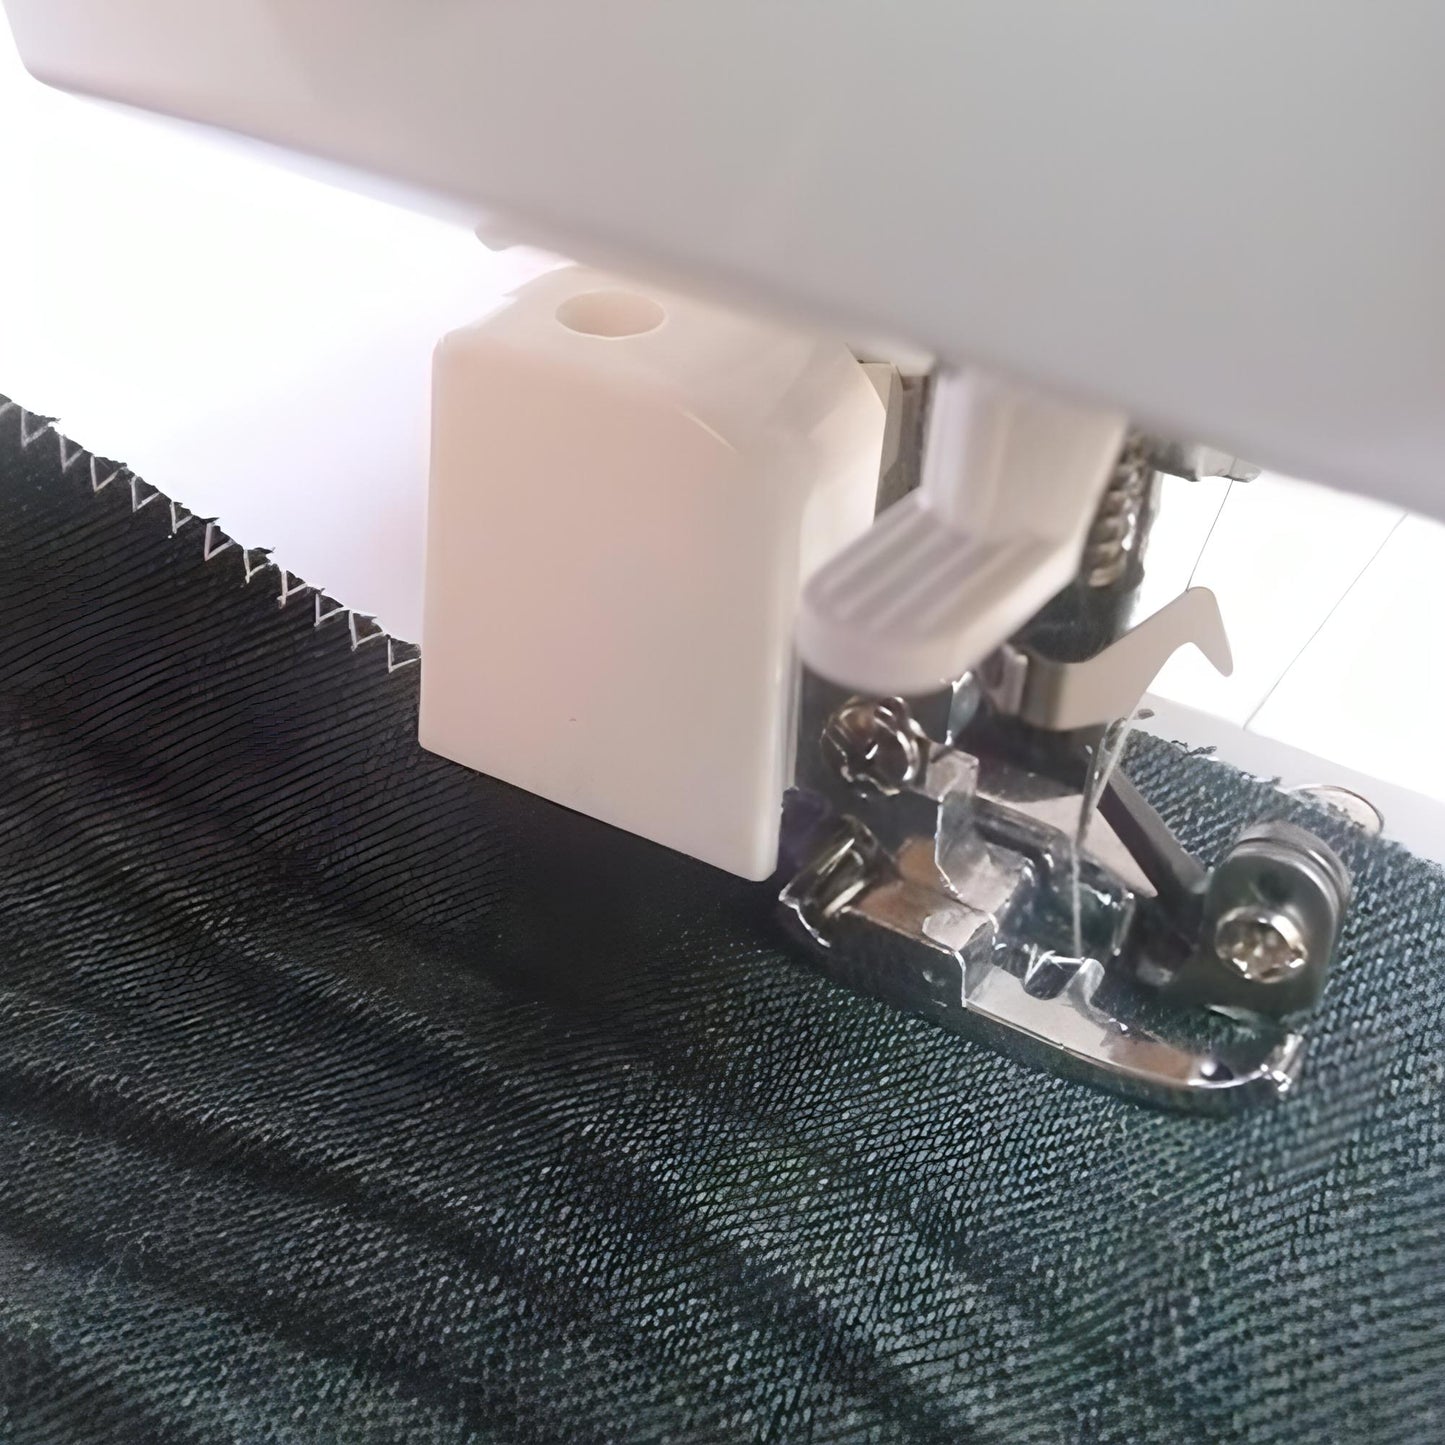 Side Cutter Overlocking Foot Attachment for Singer Sewing